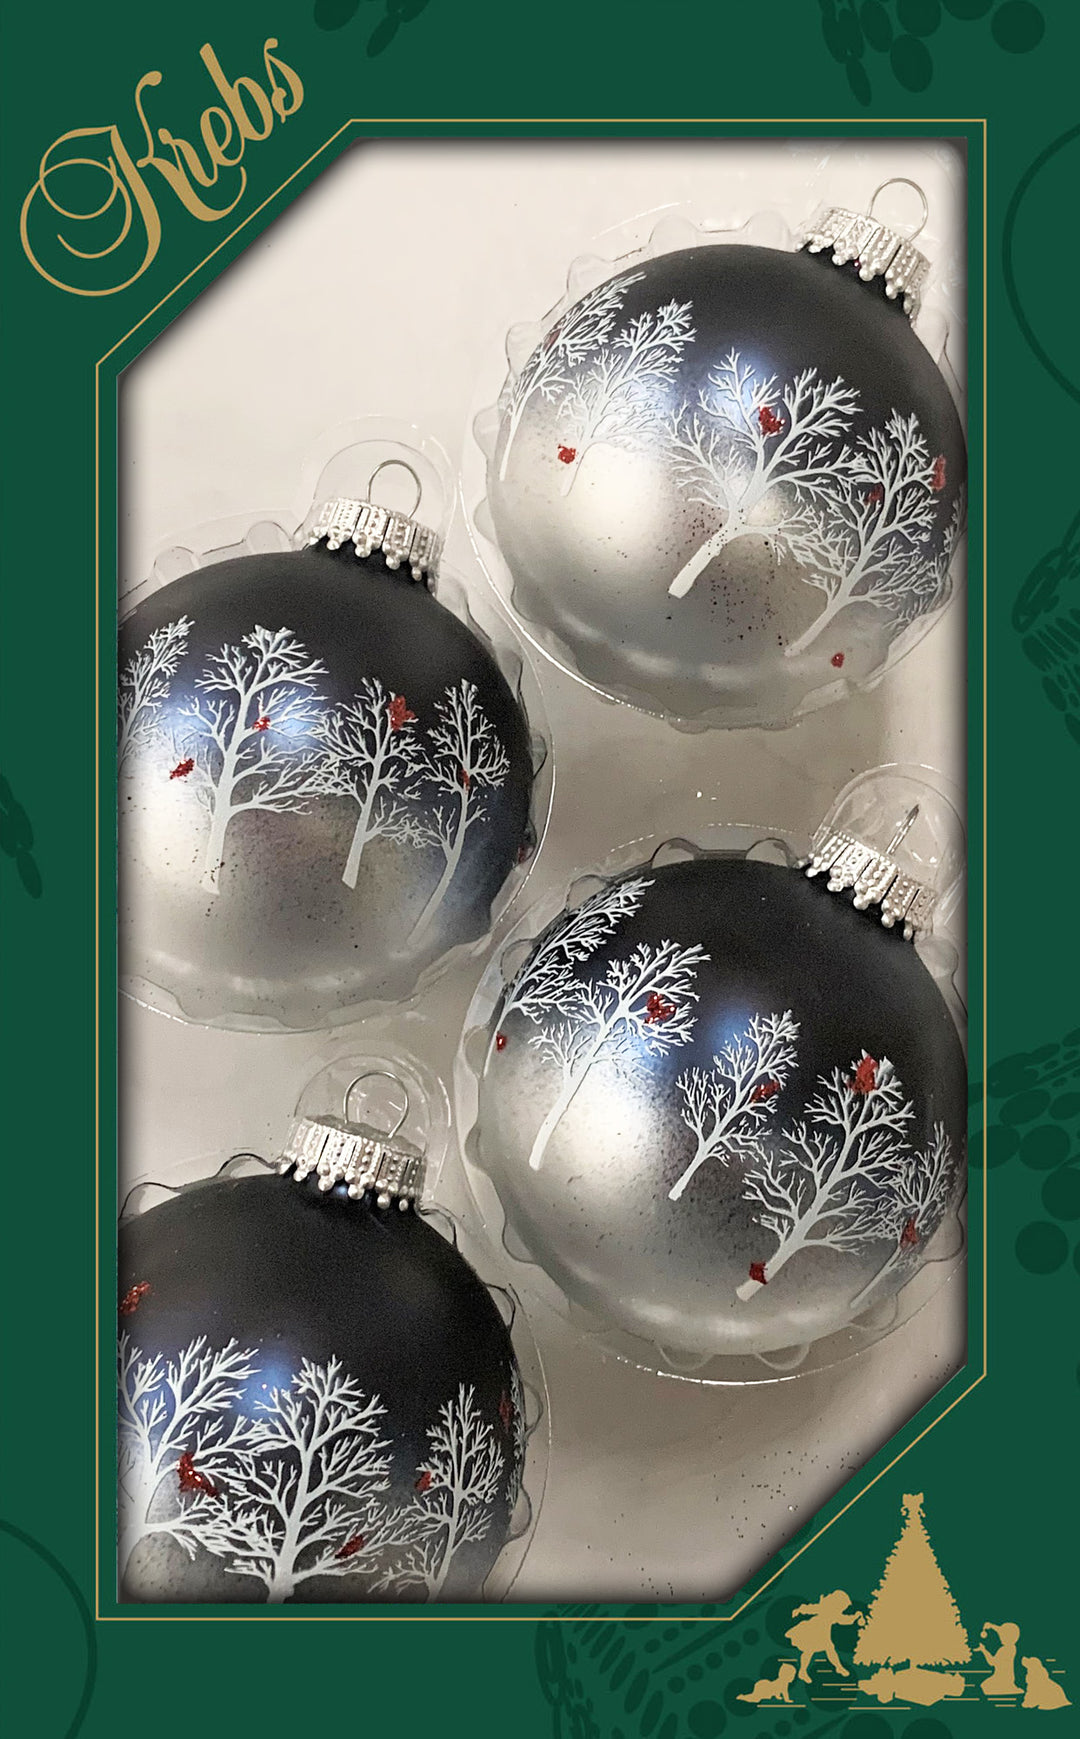 Christmas Tree Ornaments - 67mm/2.625" [4 Pieces] Decorated Glass Balls from Christmas by Krebs - Handmade Seamless Hanging Holiday Decorations for Trees (Midnight Haze & Silver w/ Trees & Cardinals)